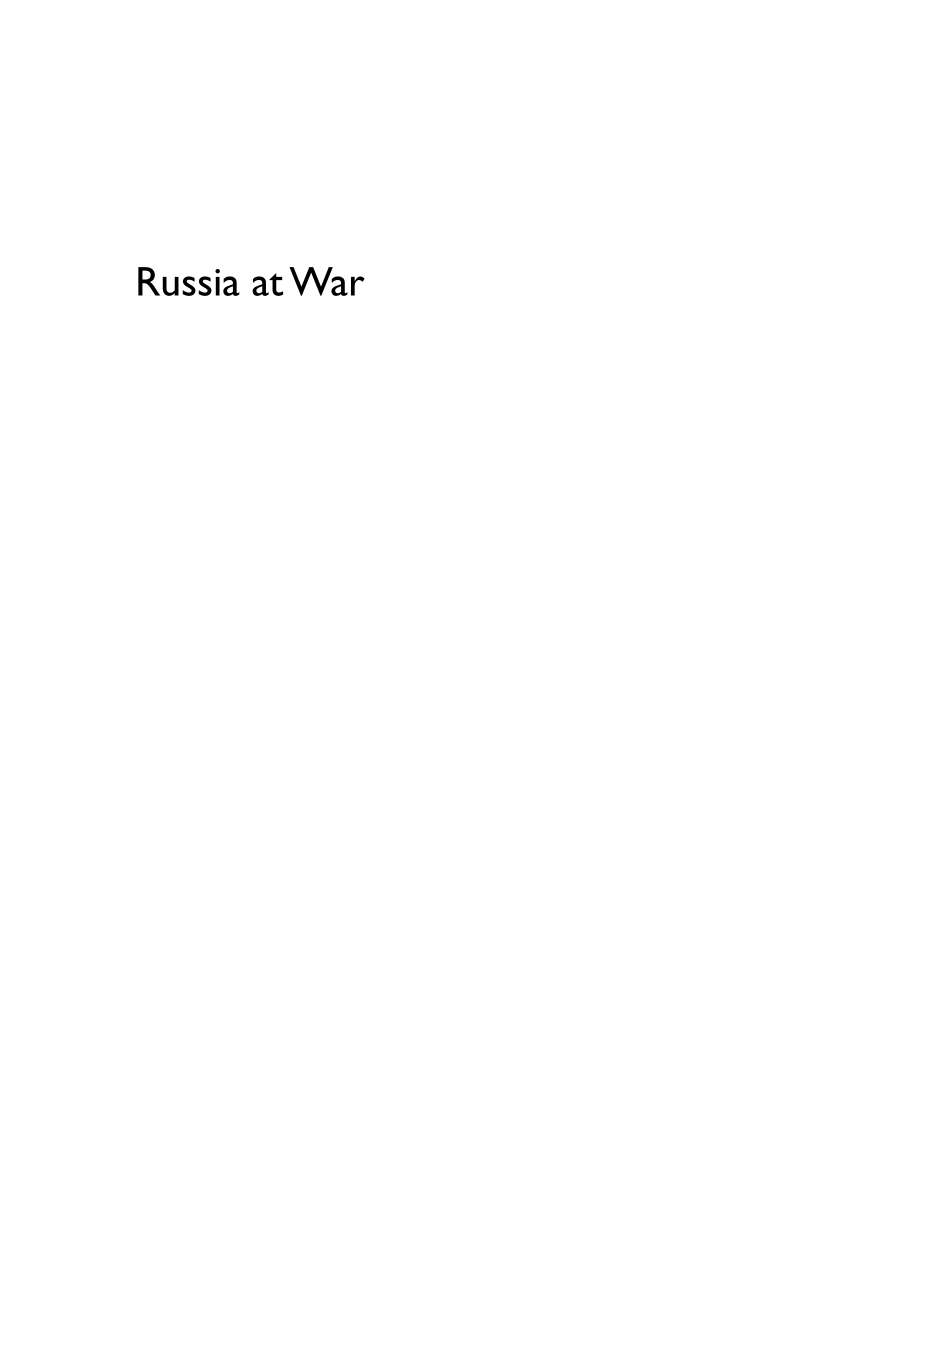 Russia at War: From the Mongol Conquest to Afghanistan, Chechnya, and Beyond [2 volumes] page i